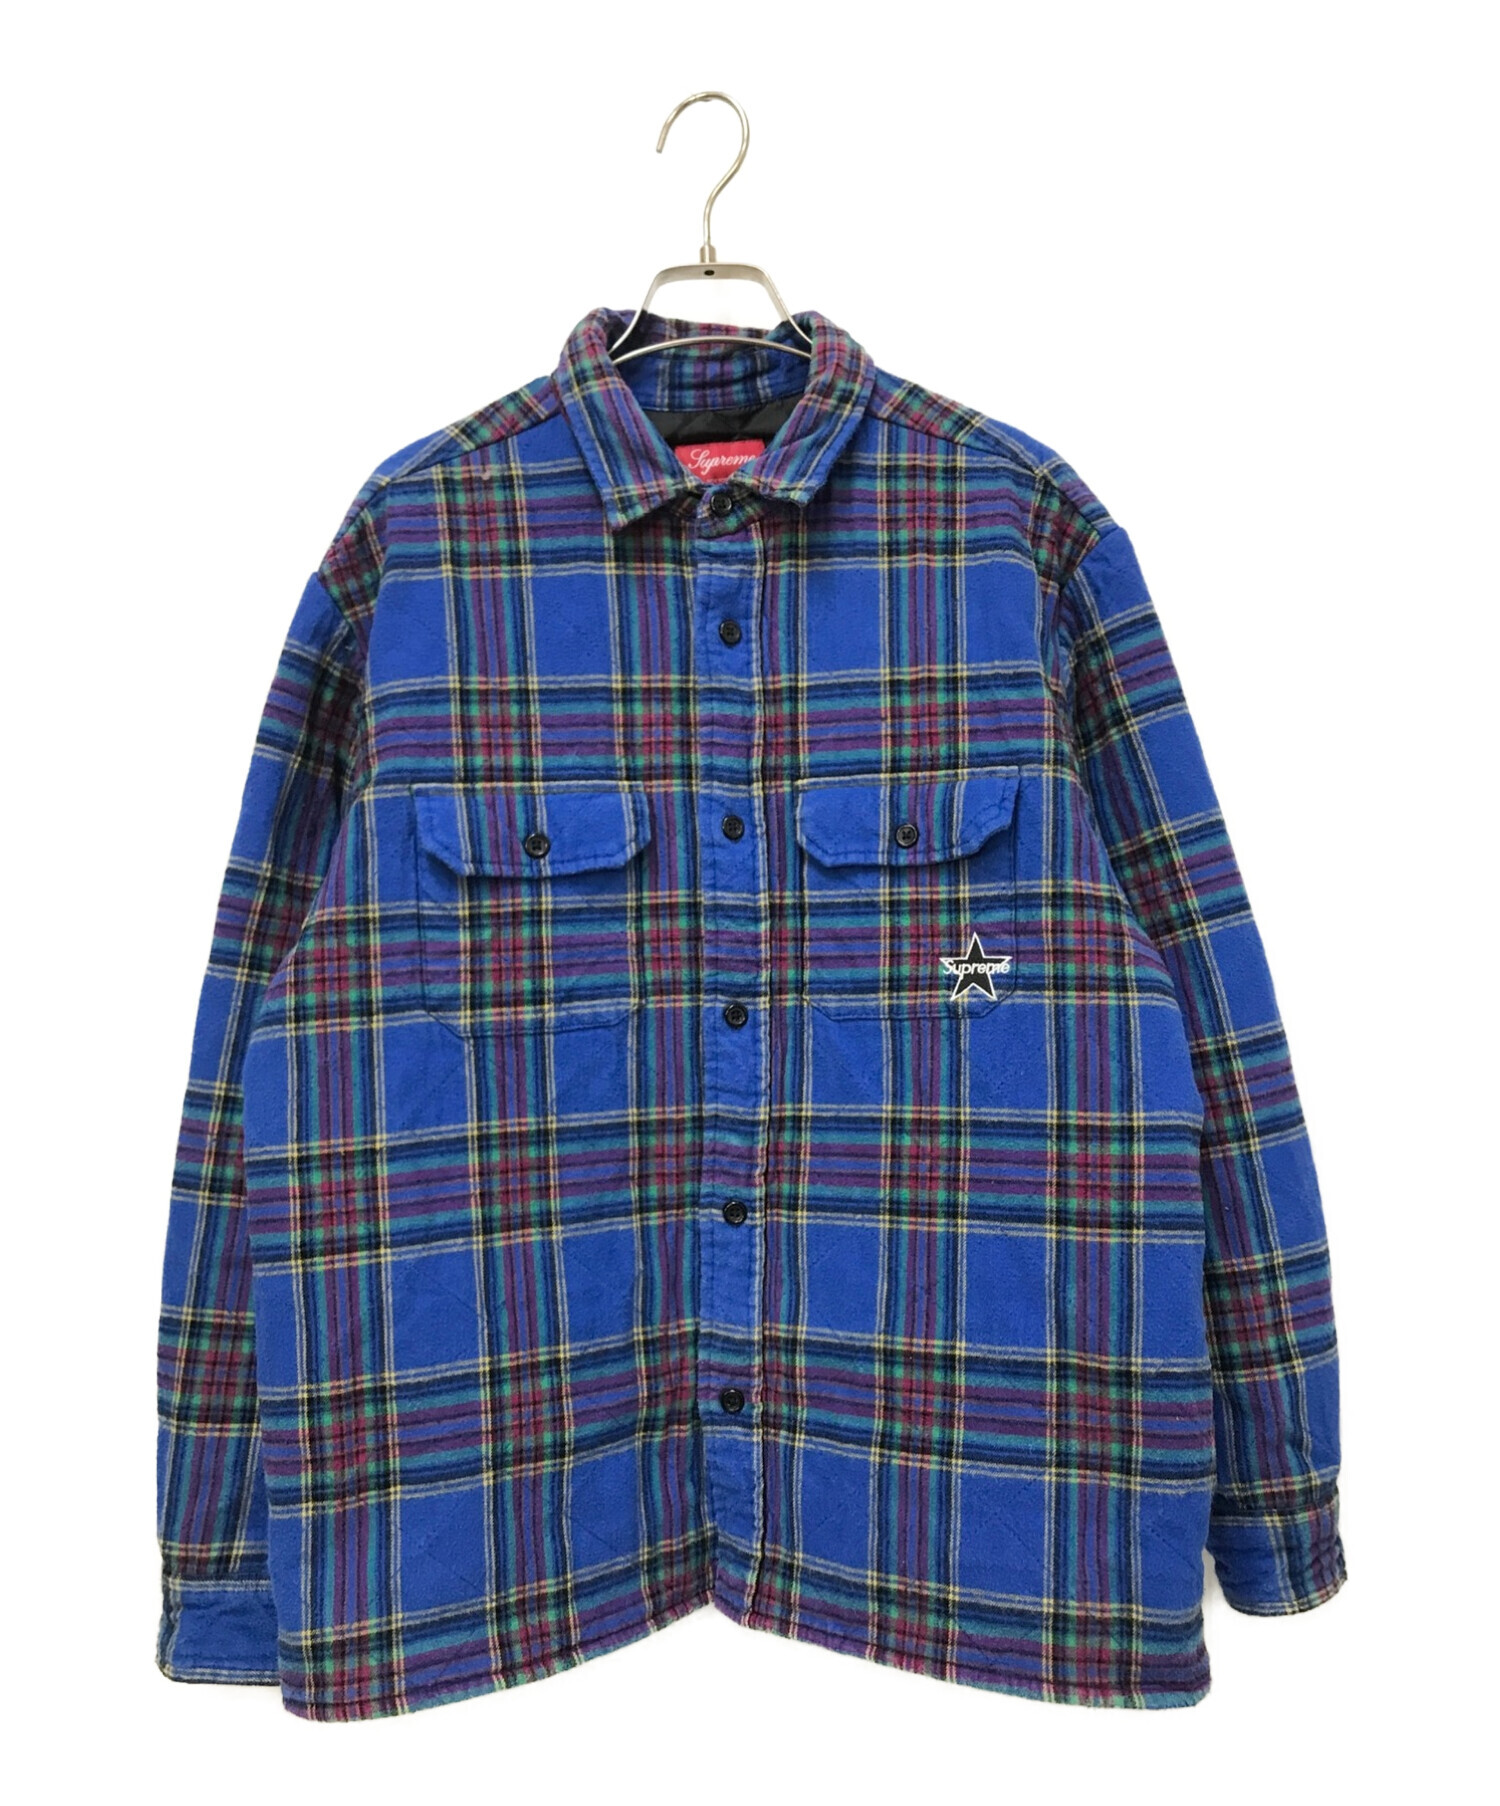 Sサイズ Supreme quilted flannel シャツ